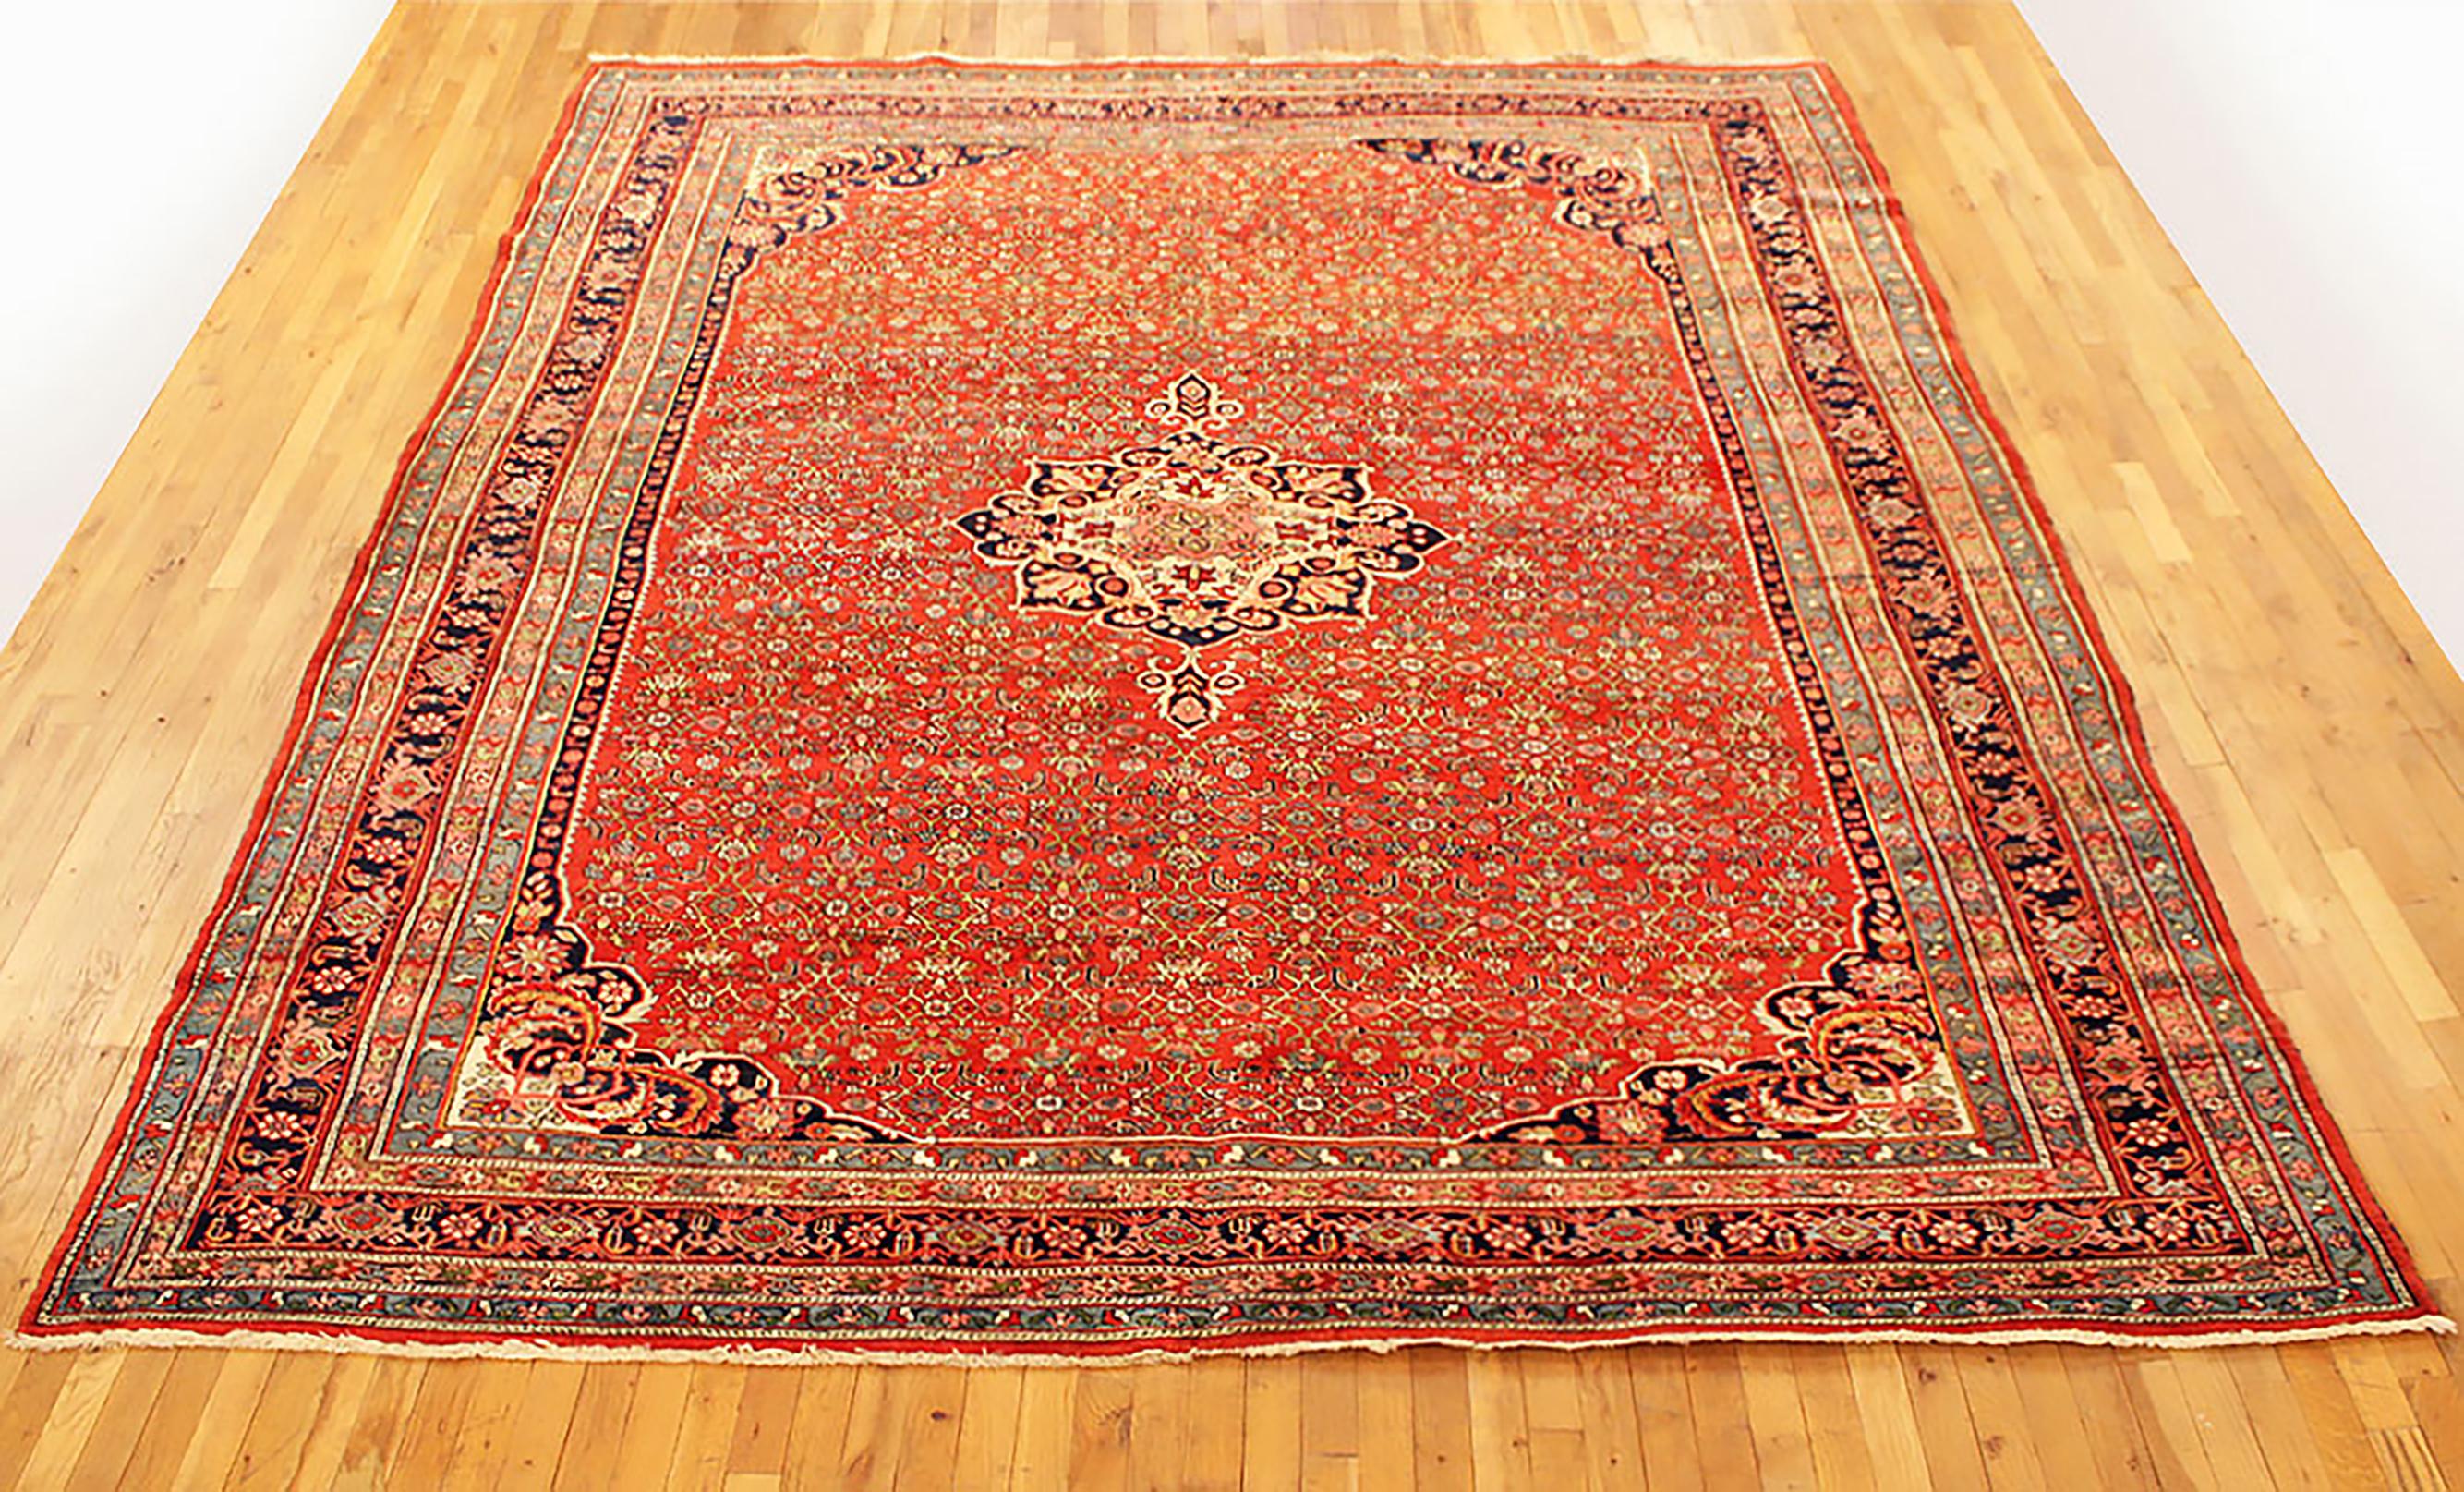 Antique Persian Bidjar Rug, Room size, circa 1900

A one-of-a-kind antique Persian Bidjar Oriental Carpet, hand-knotted with soft wool pile. This beautiful rug features a central medallion with a repeating design, on the red primary field, with a